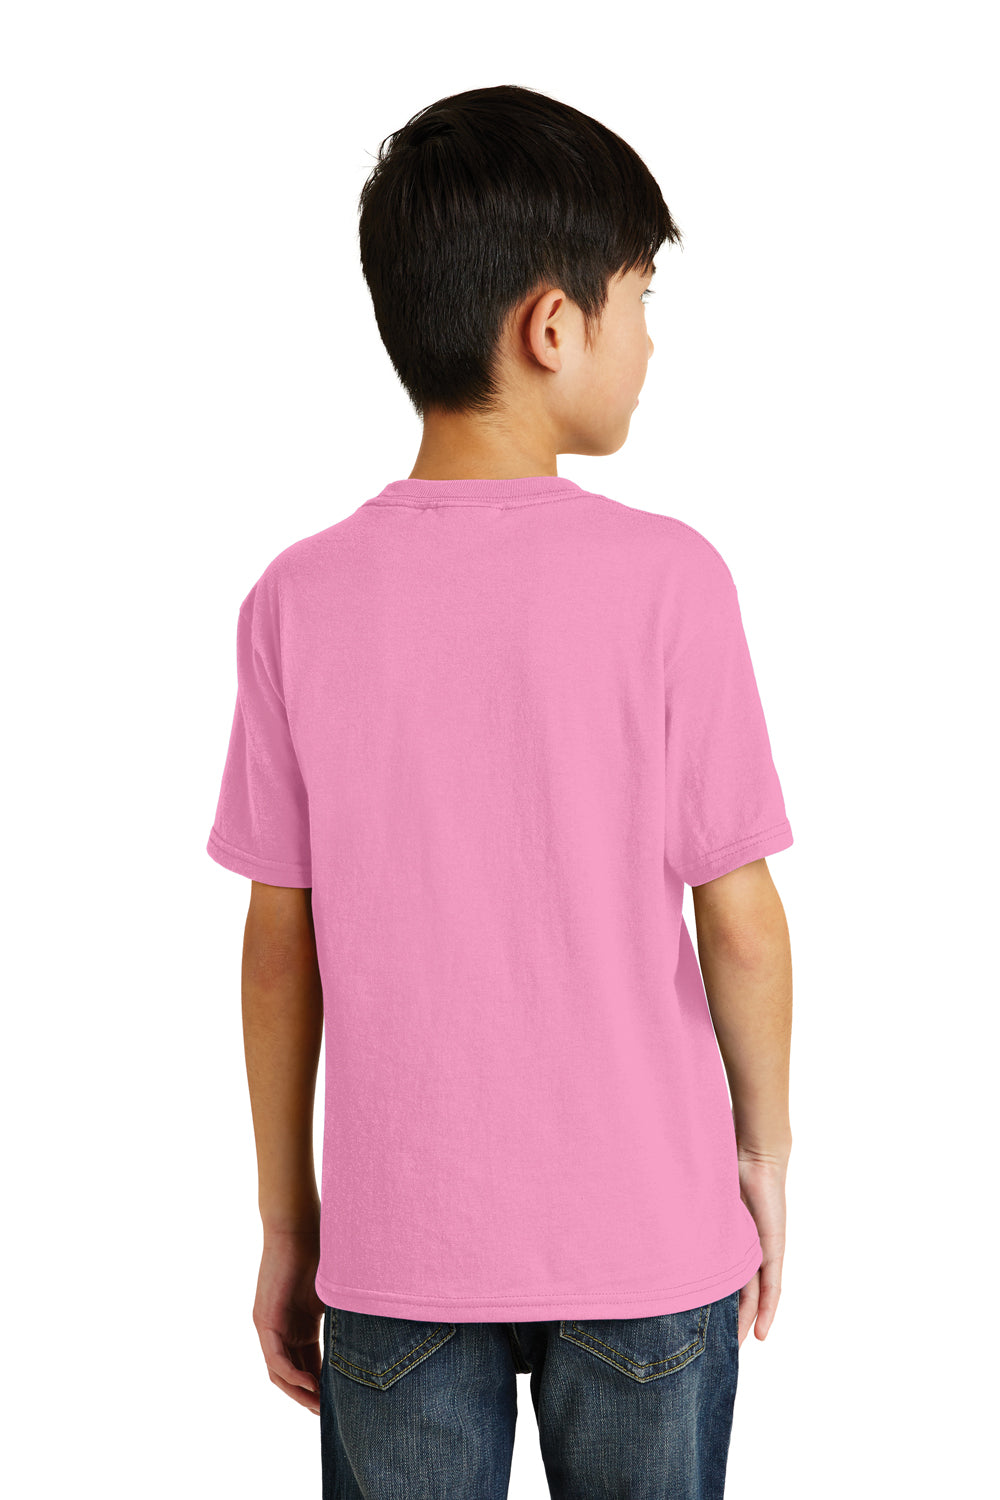 Port & Company PC55Y Youth Core Short Sleeve Crewneck T-Shirt Candy Pink Back